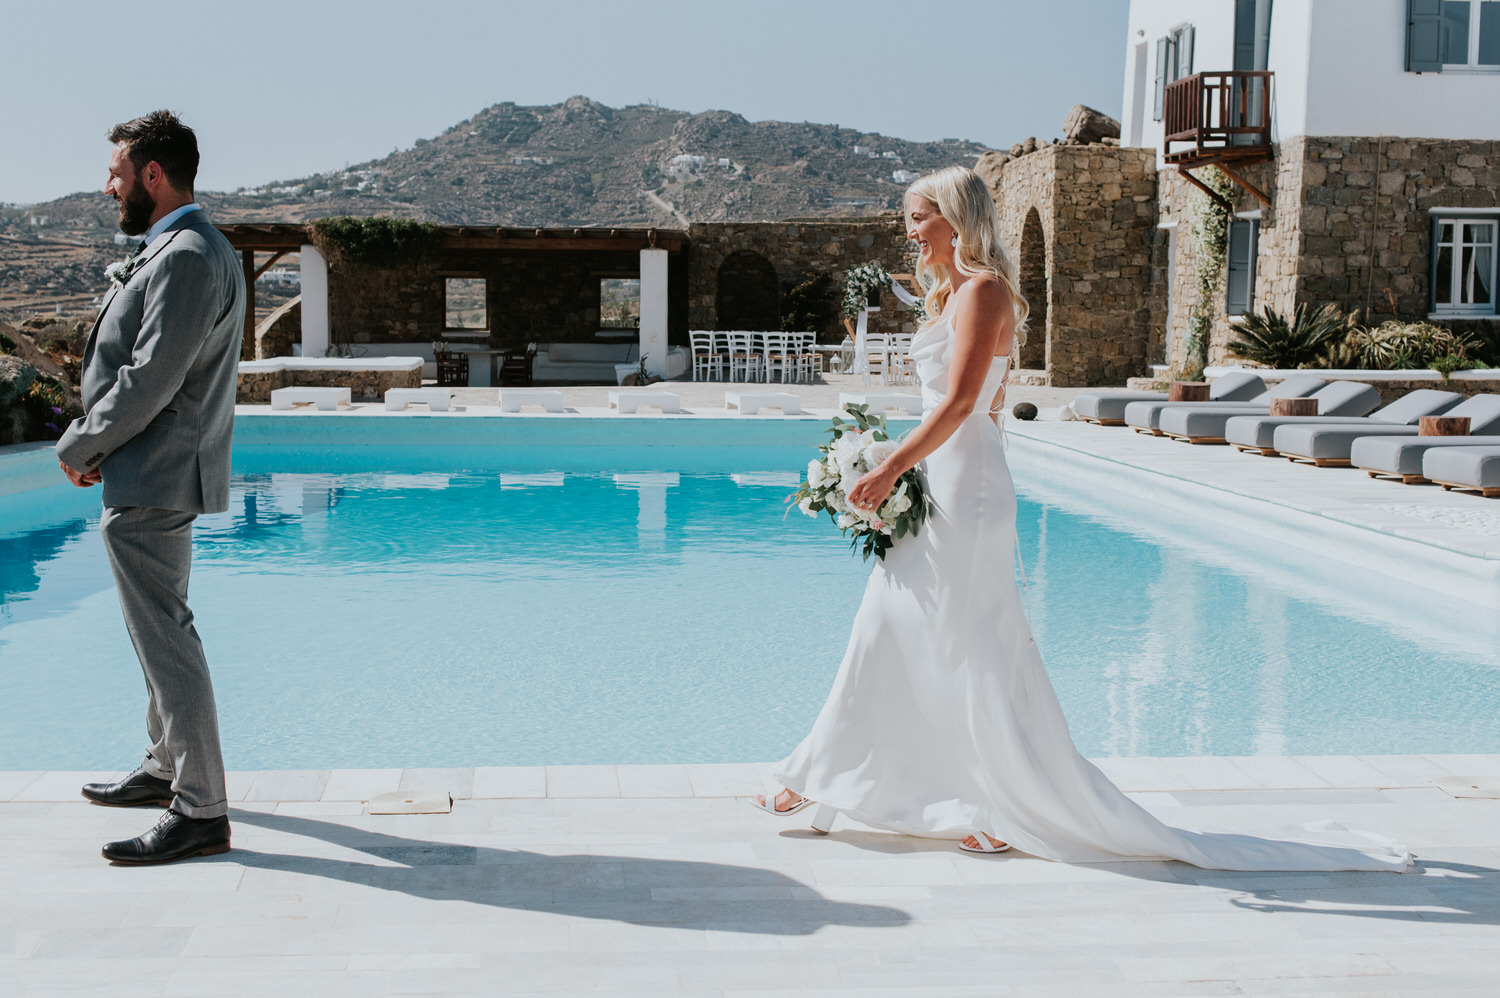 Mykonos wedding photographer: close up of bride smiling walking to her groom next to the pool with his back to her for their first look.